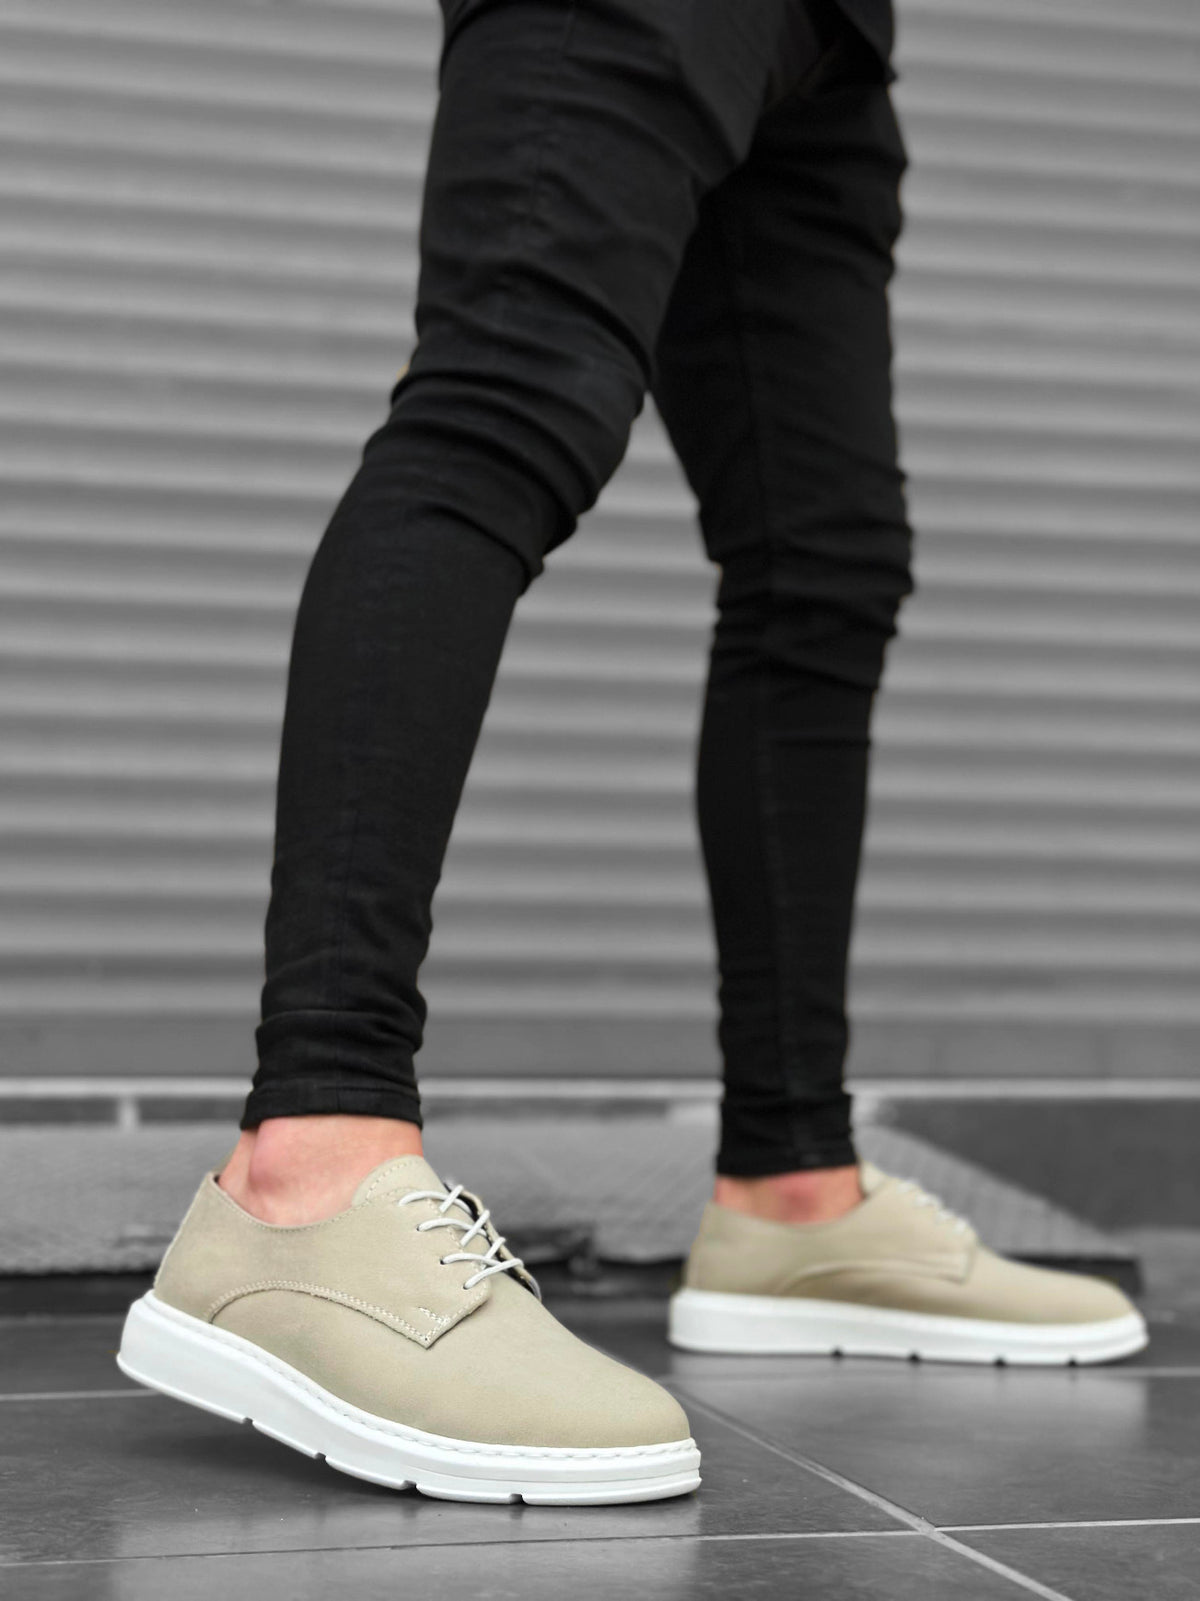 BA0003 Lace-Up Suede Classic Cream White High Sole Casual Men's Sneakers Shoes - STREET MODE ™